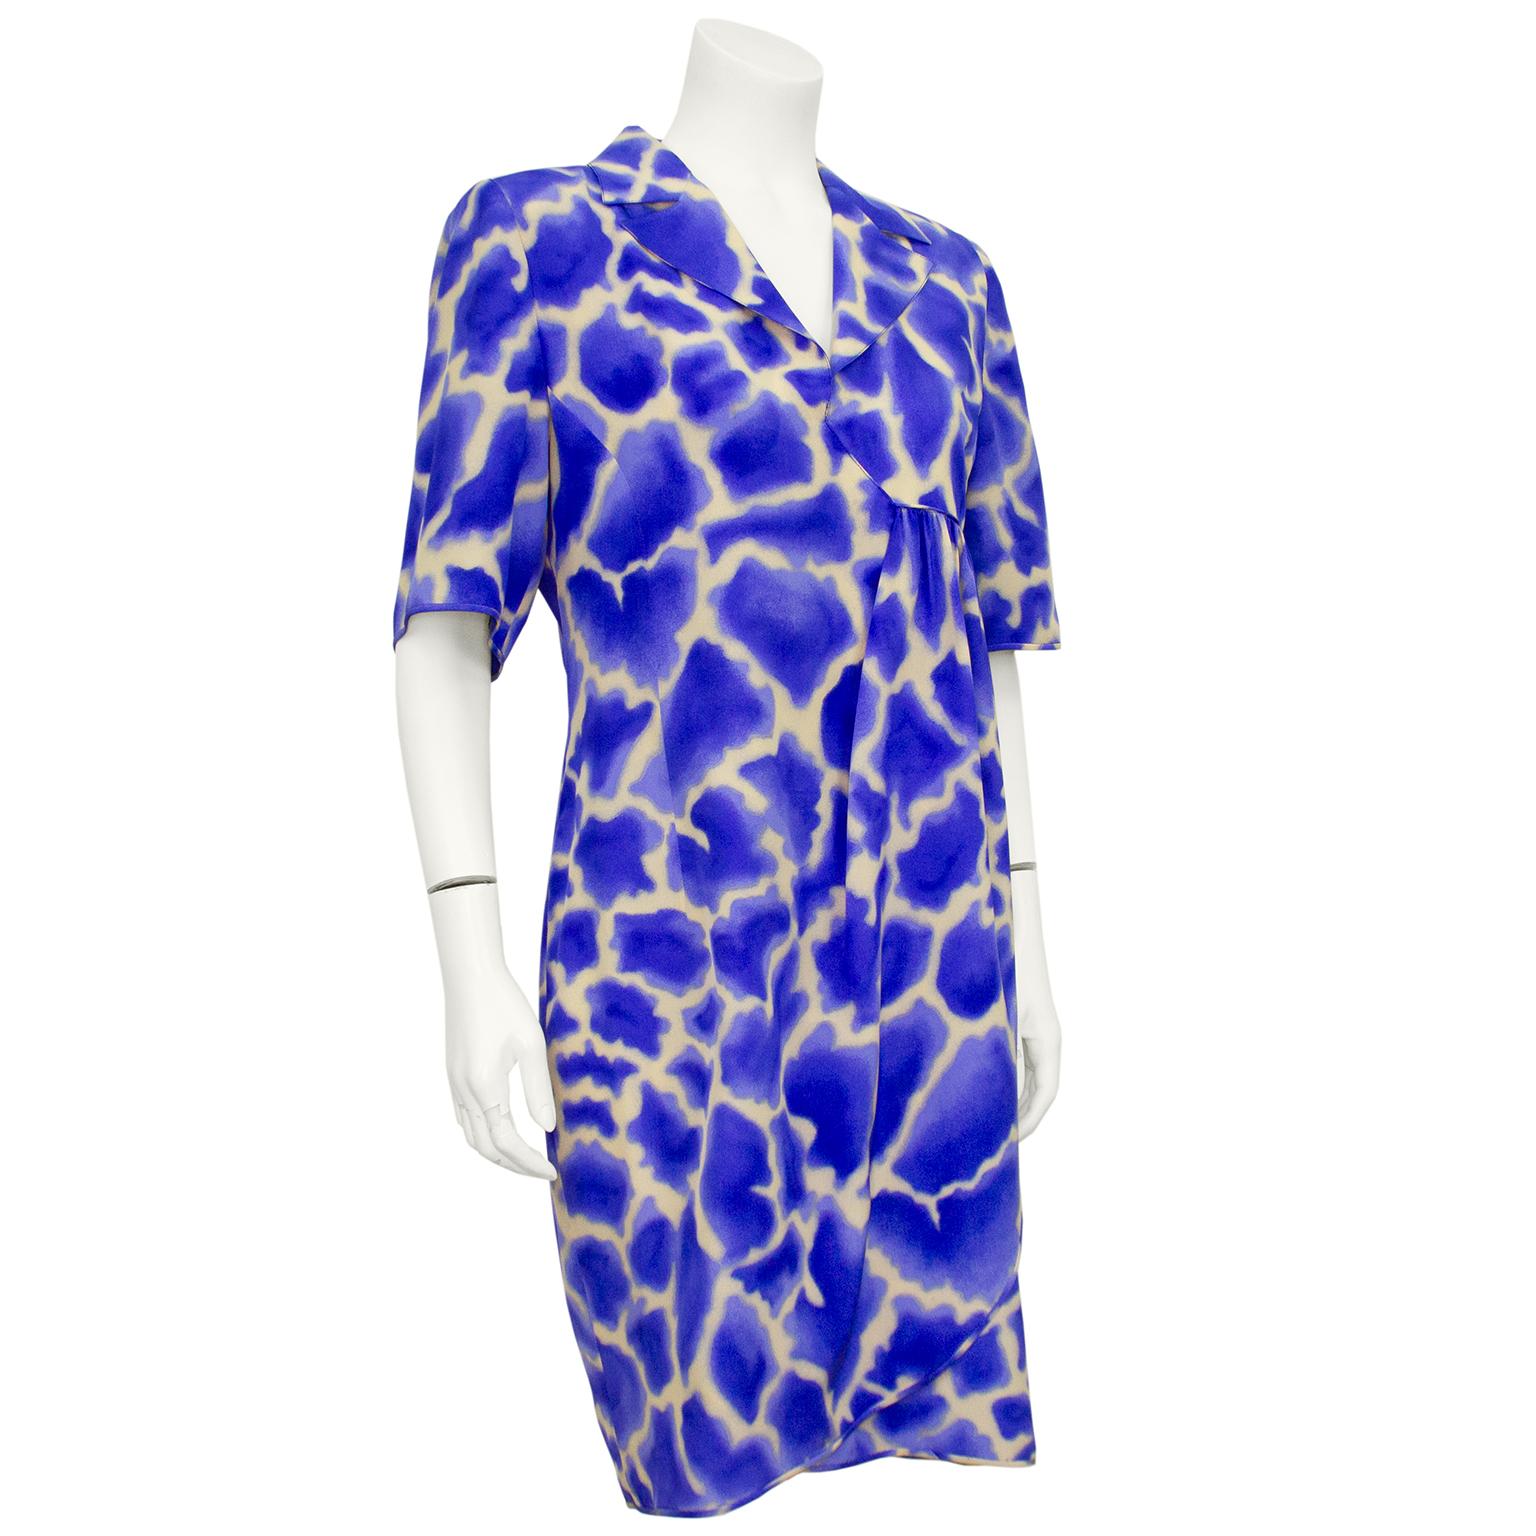 Vibrant and unique Valentino dress from the 1980s. All over blue and beige abstract giraffe print. Short sleeve with notched collar and v neckline. Asymmetrical waist with ruching on left side of the body that creates a faux wrap dress shape. Tulip